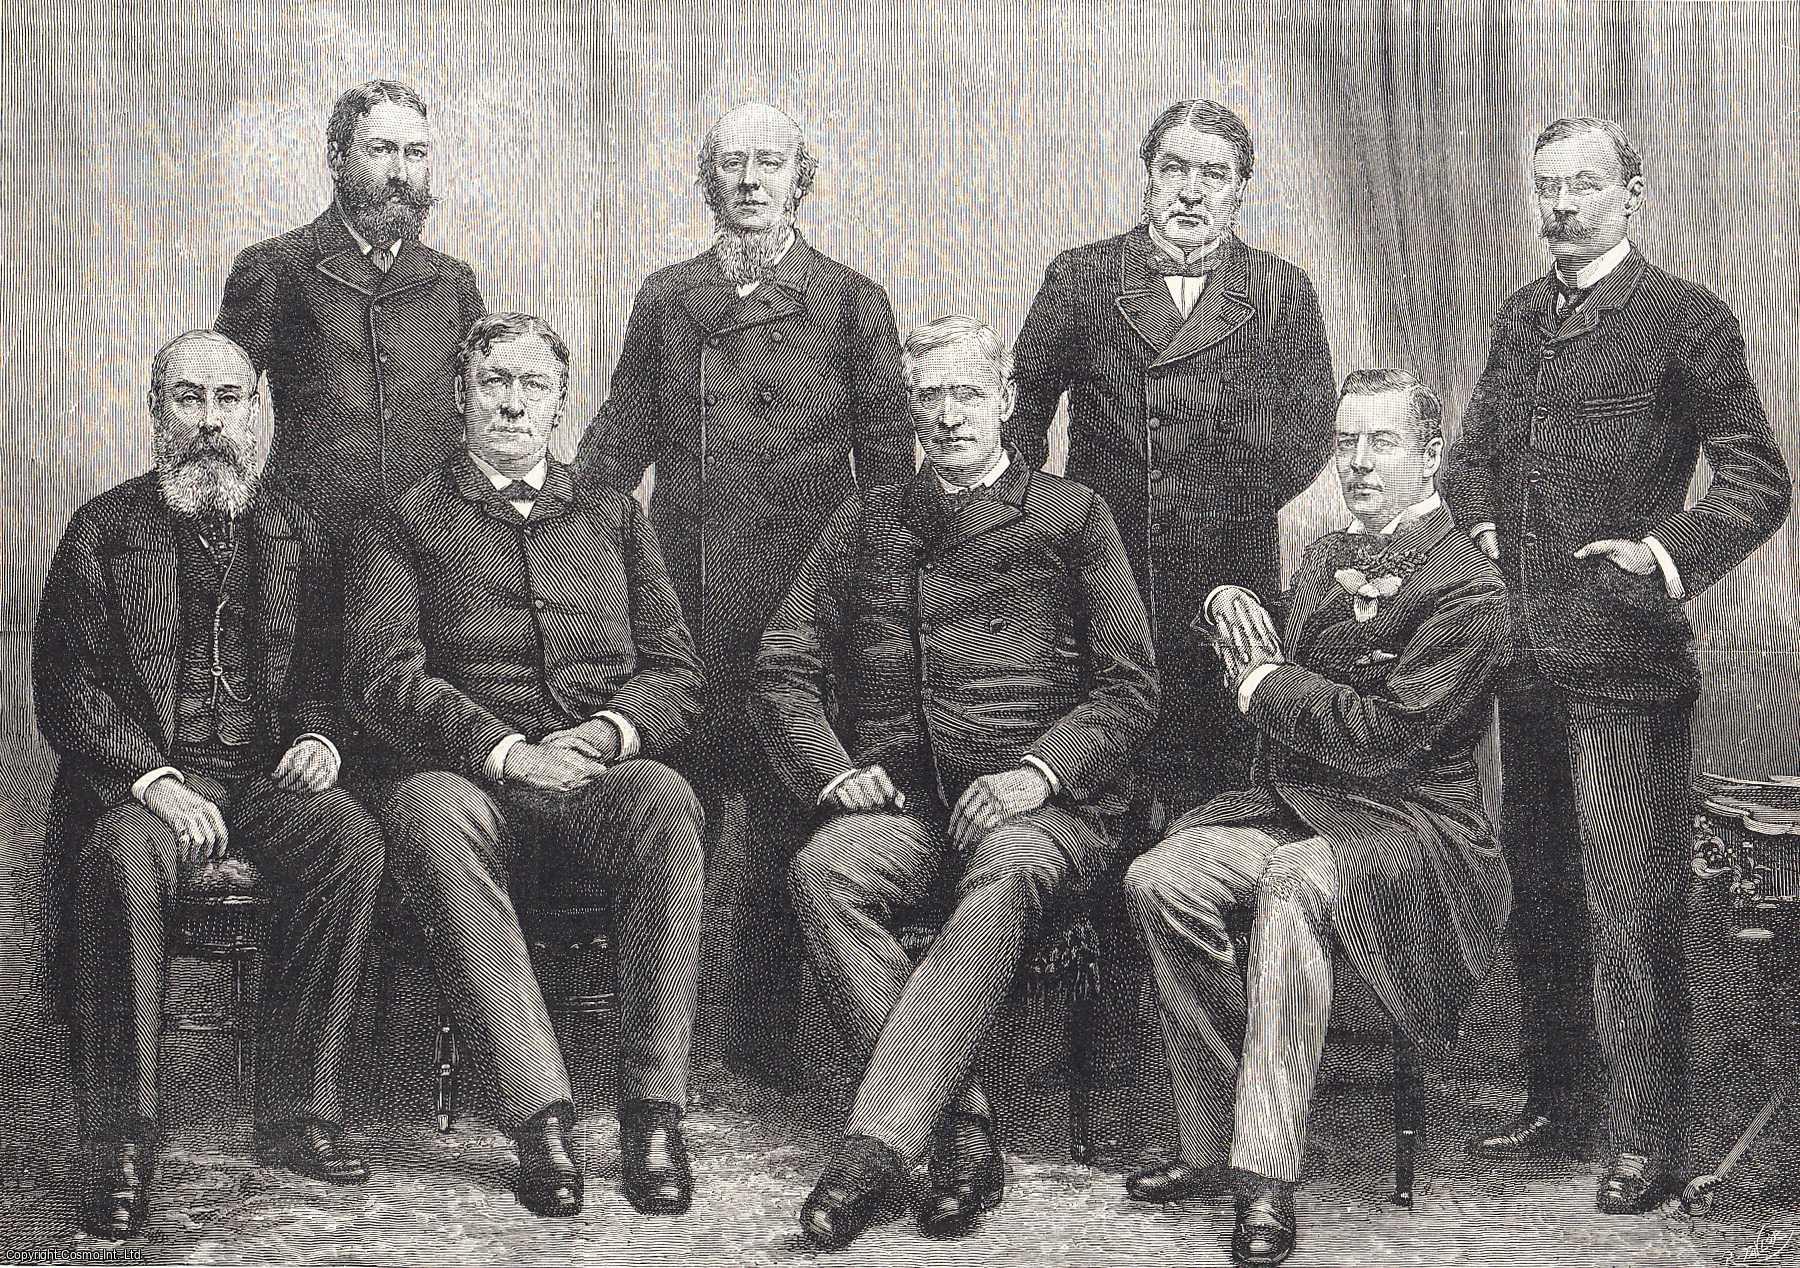 POLITICS - The Washington Fishery Conference; Portraits of the Plenipotentiaries on each Side. An original print from the Illustrated London News, 1888.